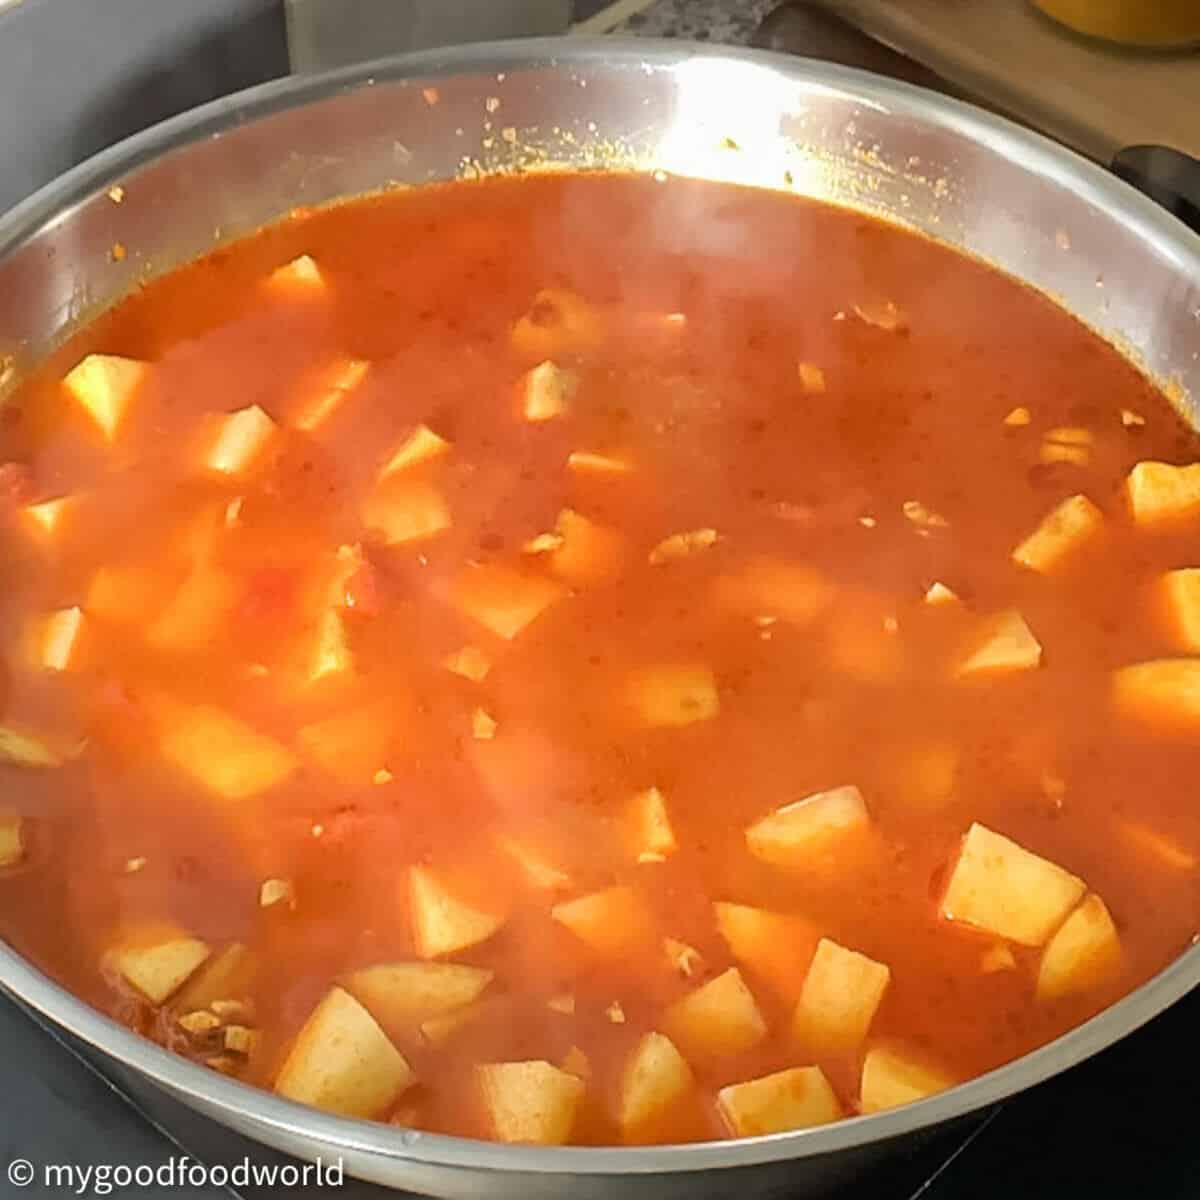 Potatoes cooking in spices and gravy in a stainless steel frying pan.